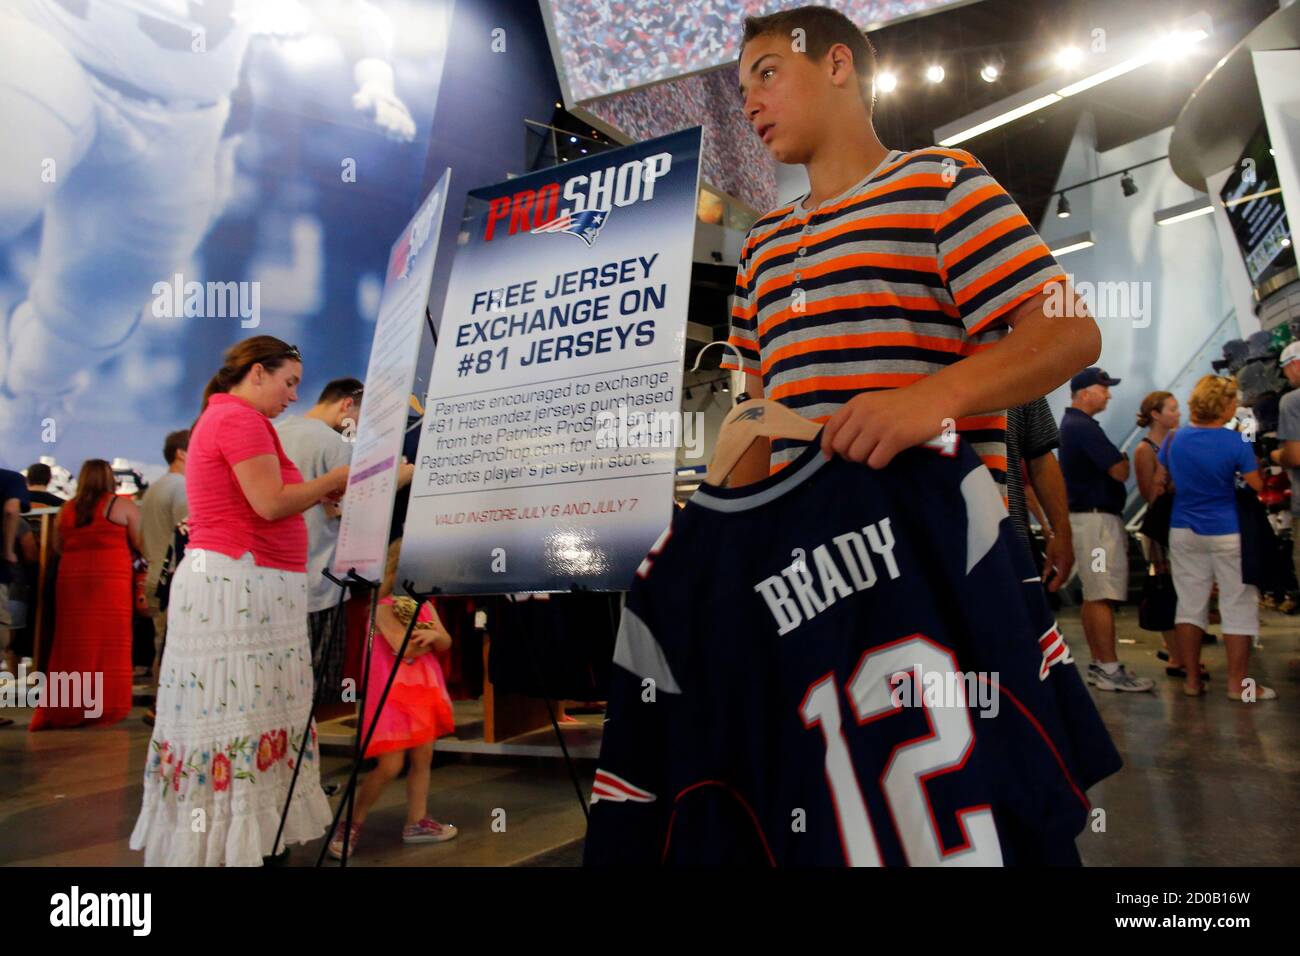 Fans pick out replacement jerseys in exchange for jerseys of former New  England Patriots player Aaron Hernandez at the club's merchandise shop in  Foxborough, Massachusetts July 6, 2013. The Patriots offered the